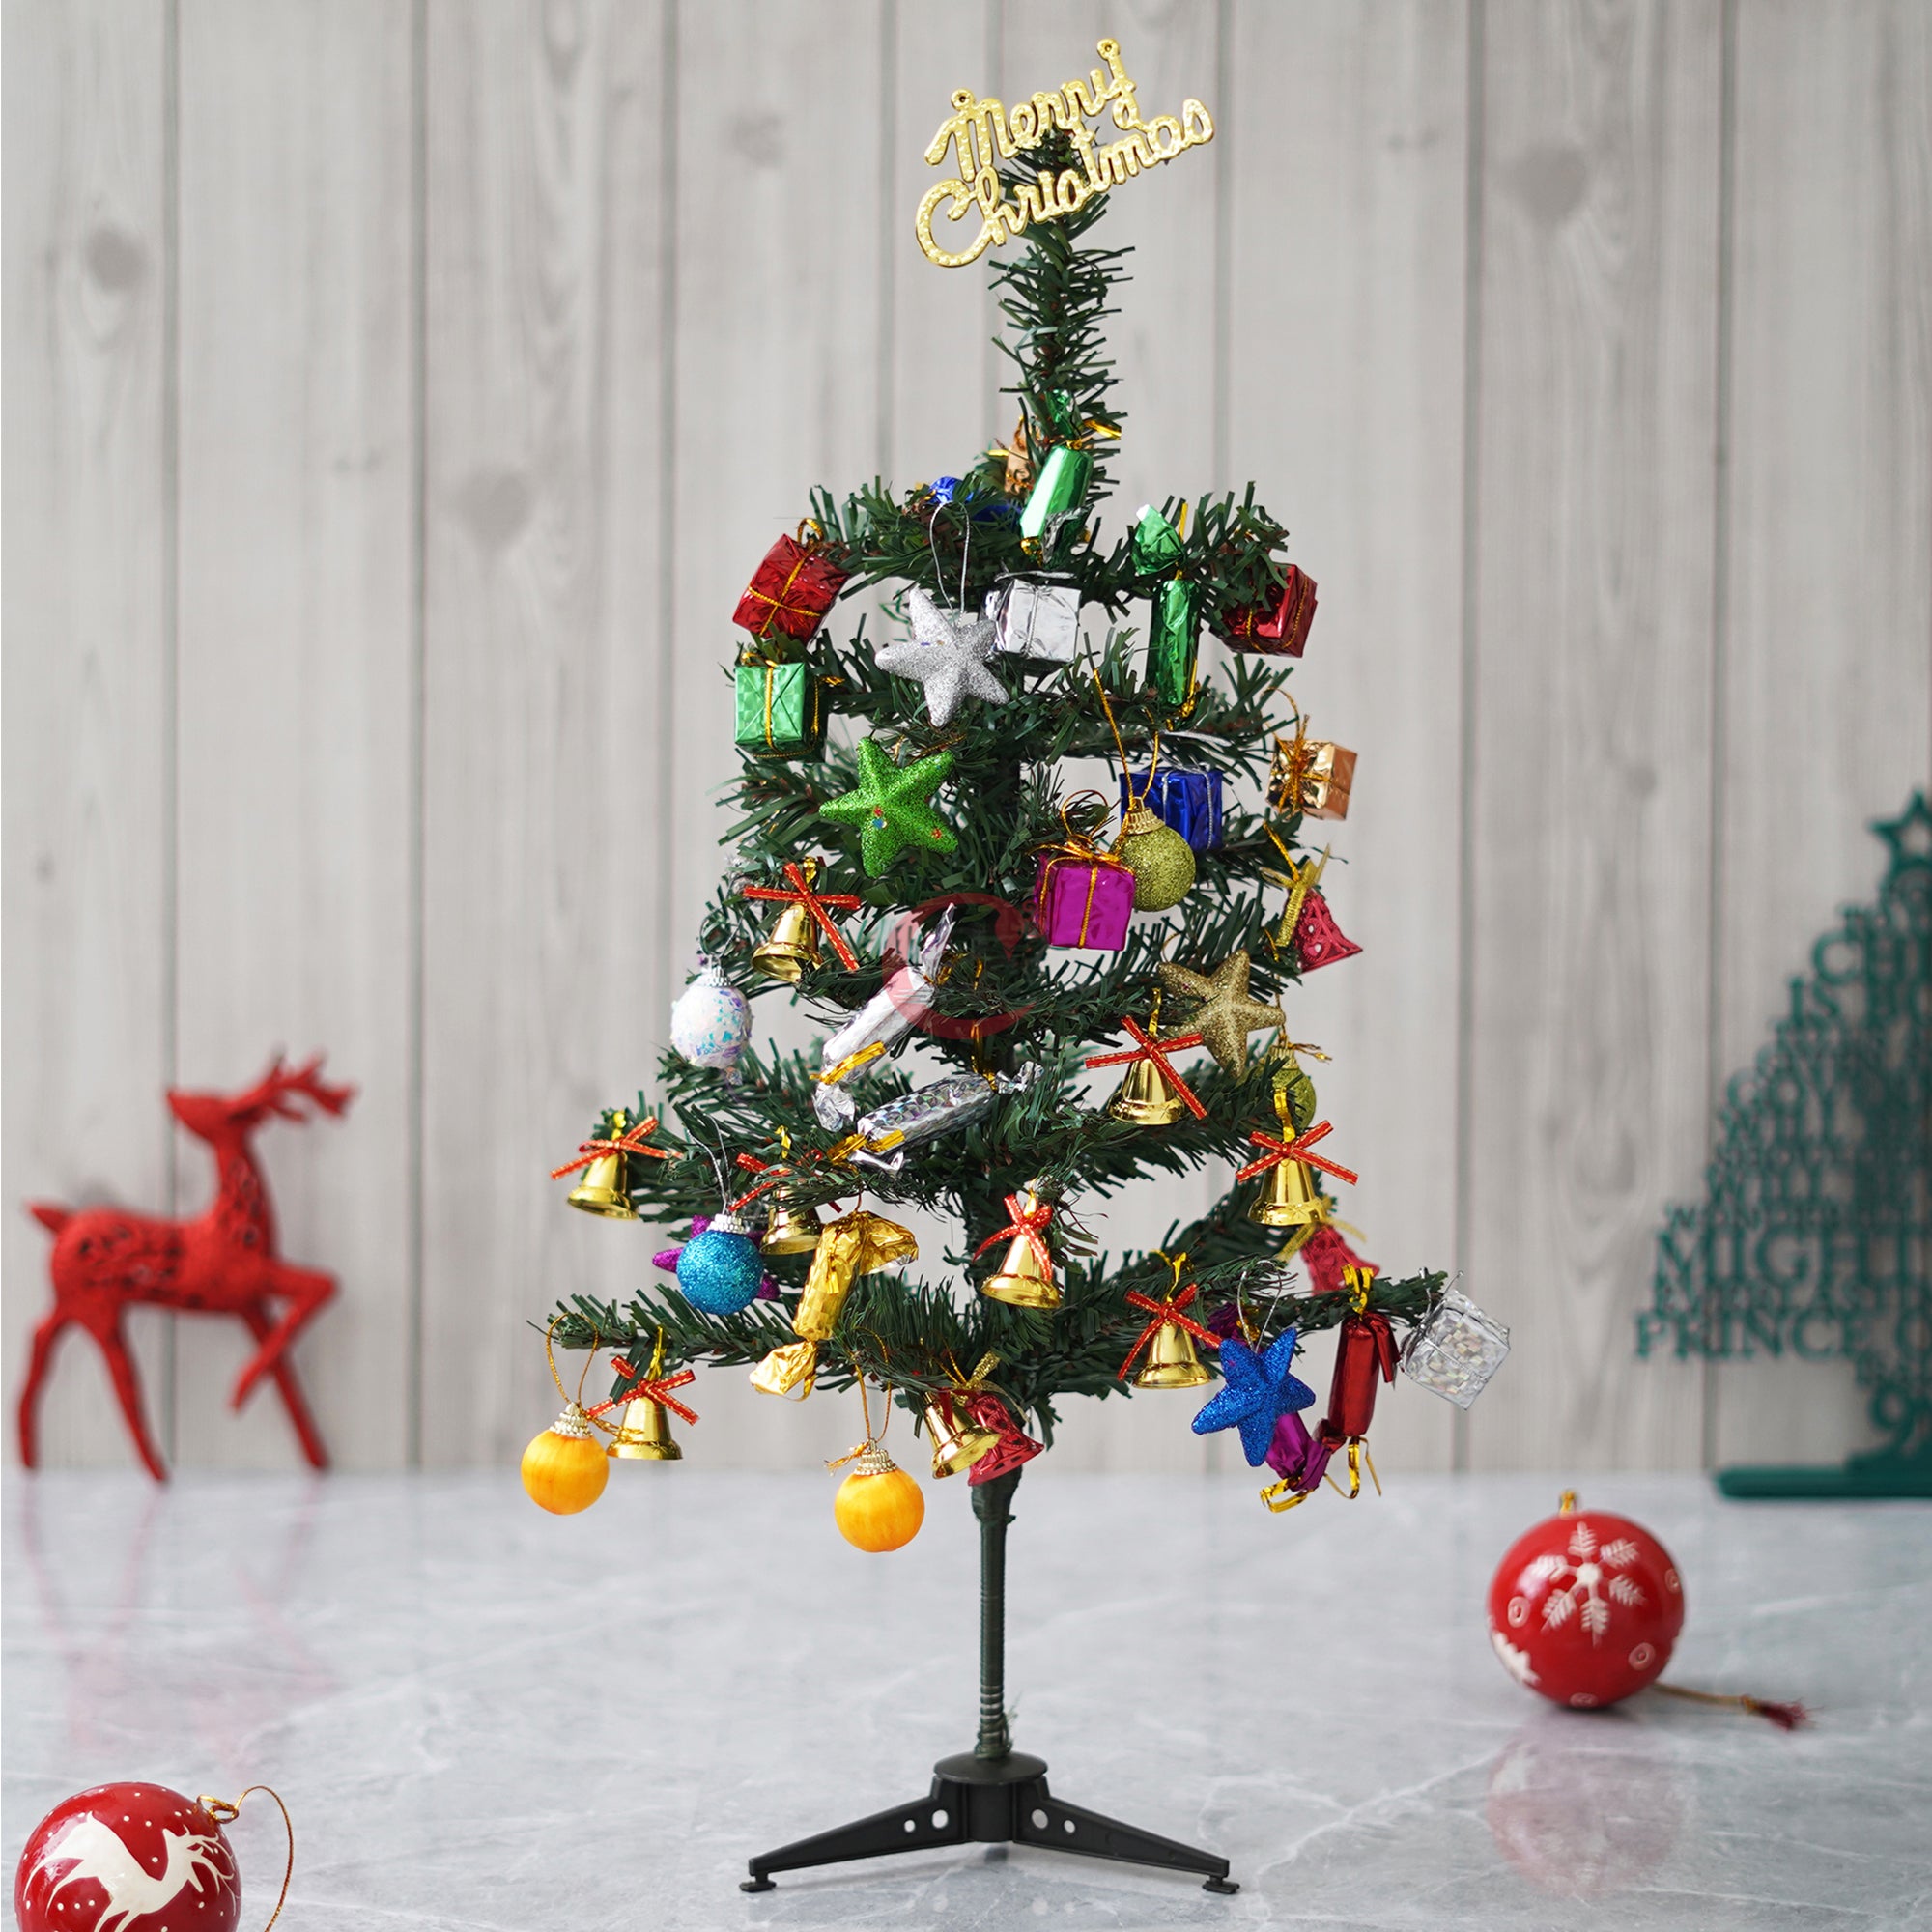 eCraftIndia 2 Feet Green Artificial Christmas Tree Xmas Pine Tree with Metal Stand - Xmas Tree for Indoor, Outdoor, Home, Living Room, Office, Church Decor - Merry Christmas Decoration Item 6